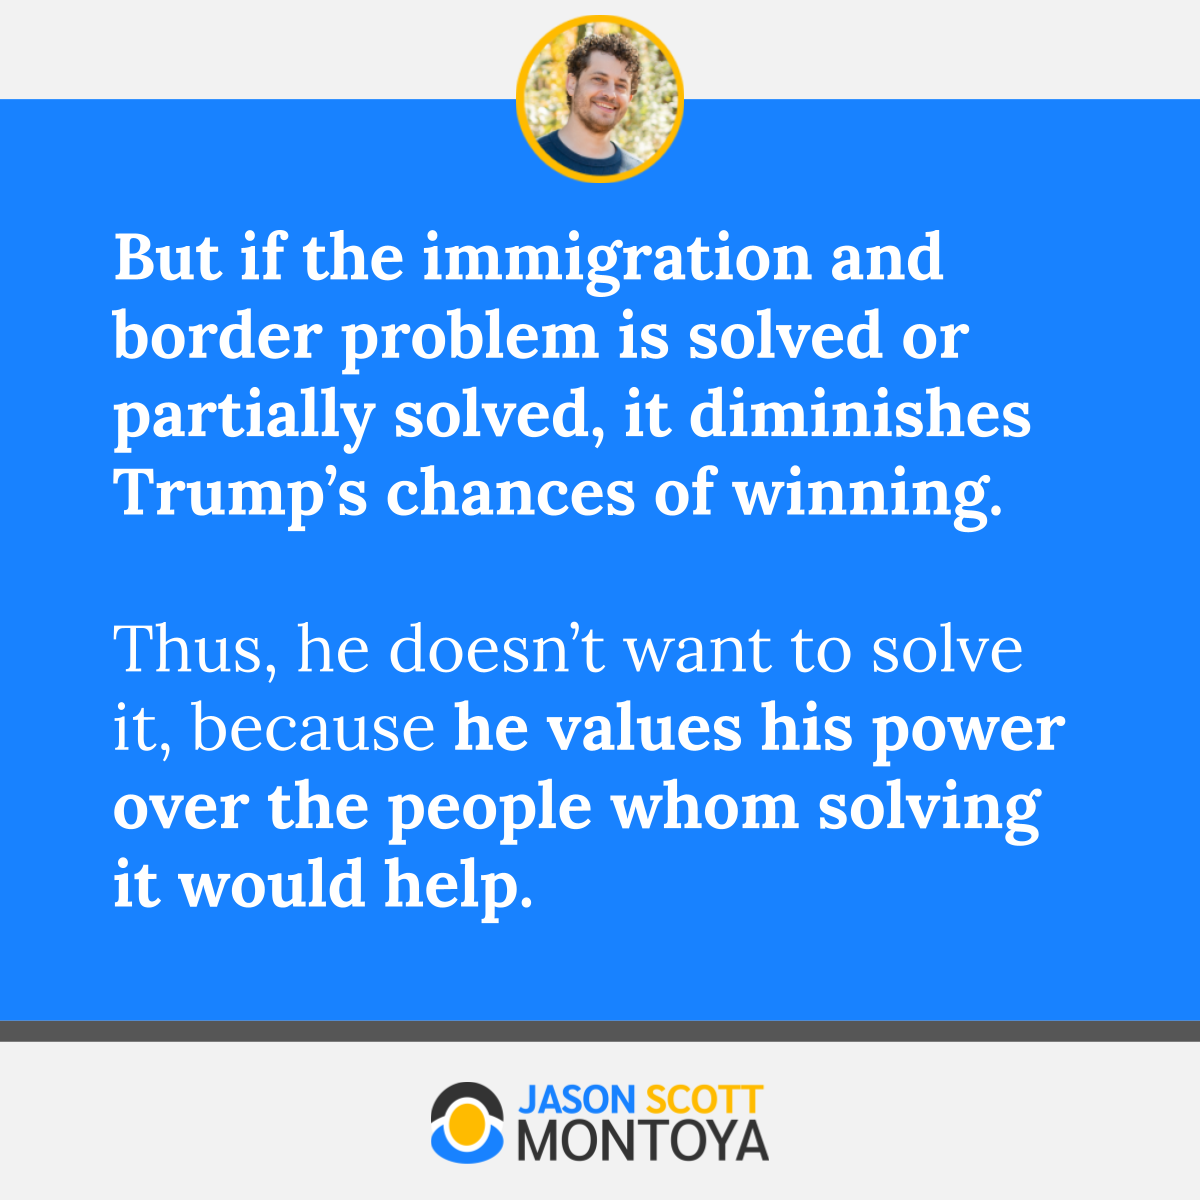 But if the immigration and border problem is solved or partially solved, it diminishes Trump’s chances of winning.  Thus, he doesn’t want to solve it, because he values his power over the people whom solving it would help.